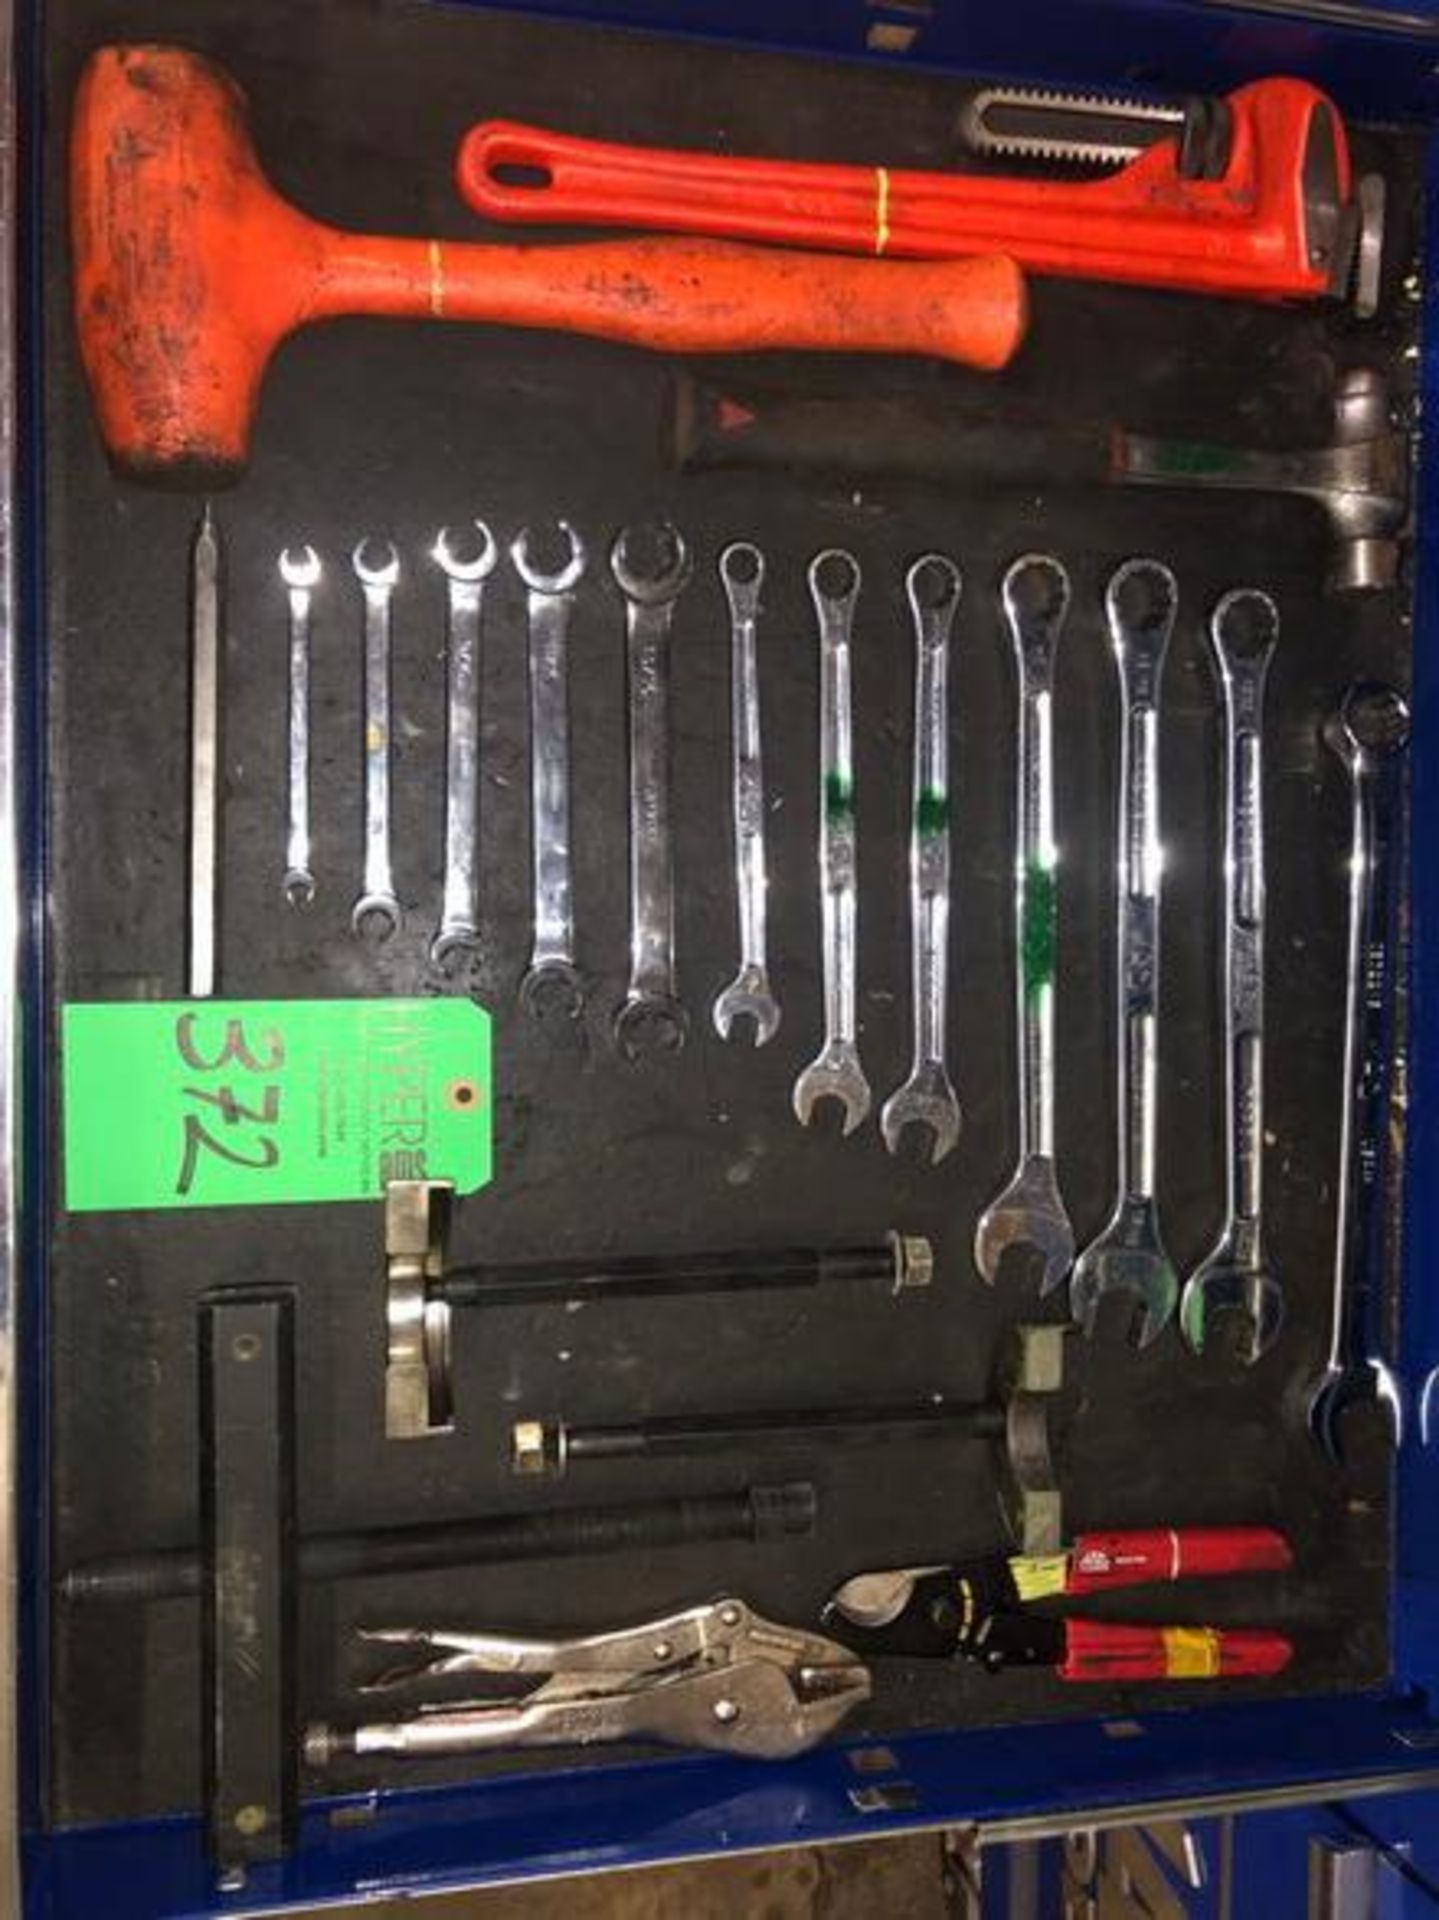 MacTool Combination Wrench Tool Set - Image 5 of 5